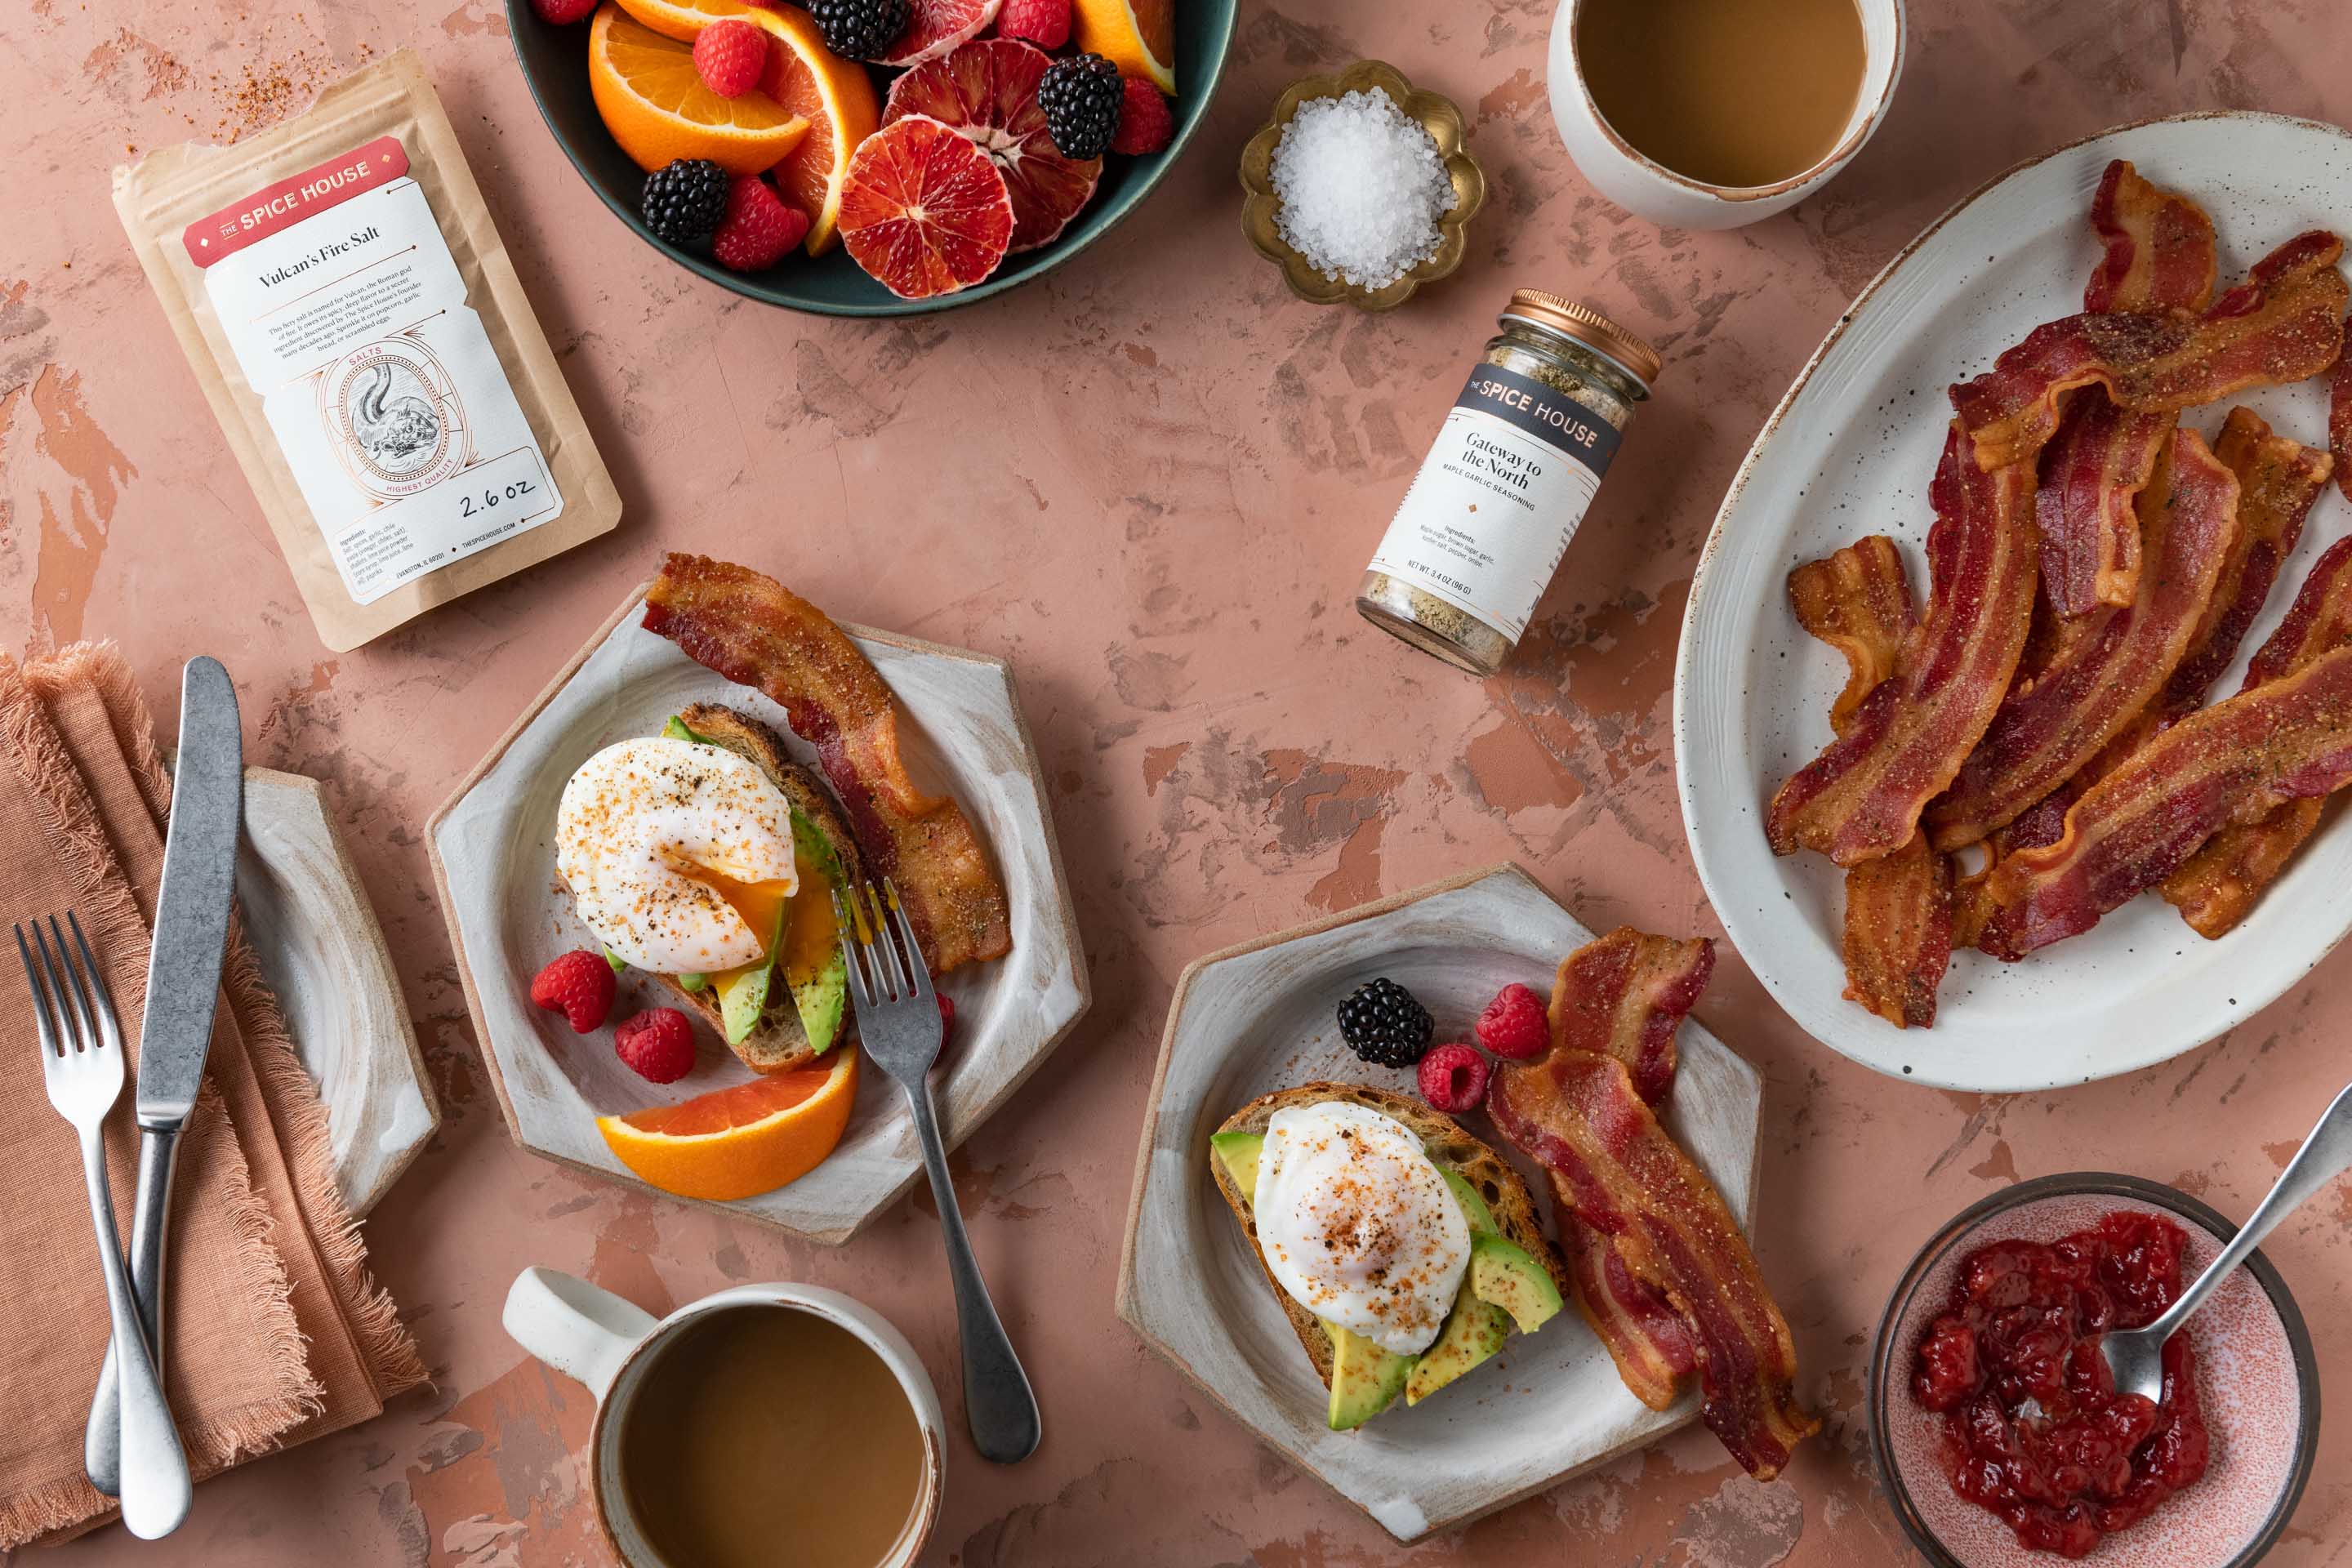 Morgan Ione Photography | Chicago Commercial Food Photographer - The Spice House Breakfast 